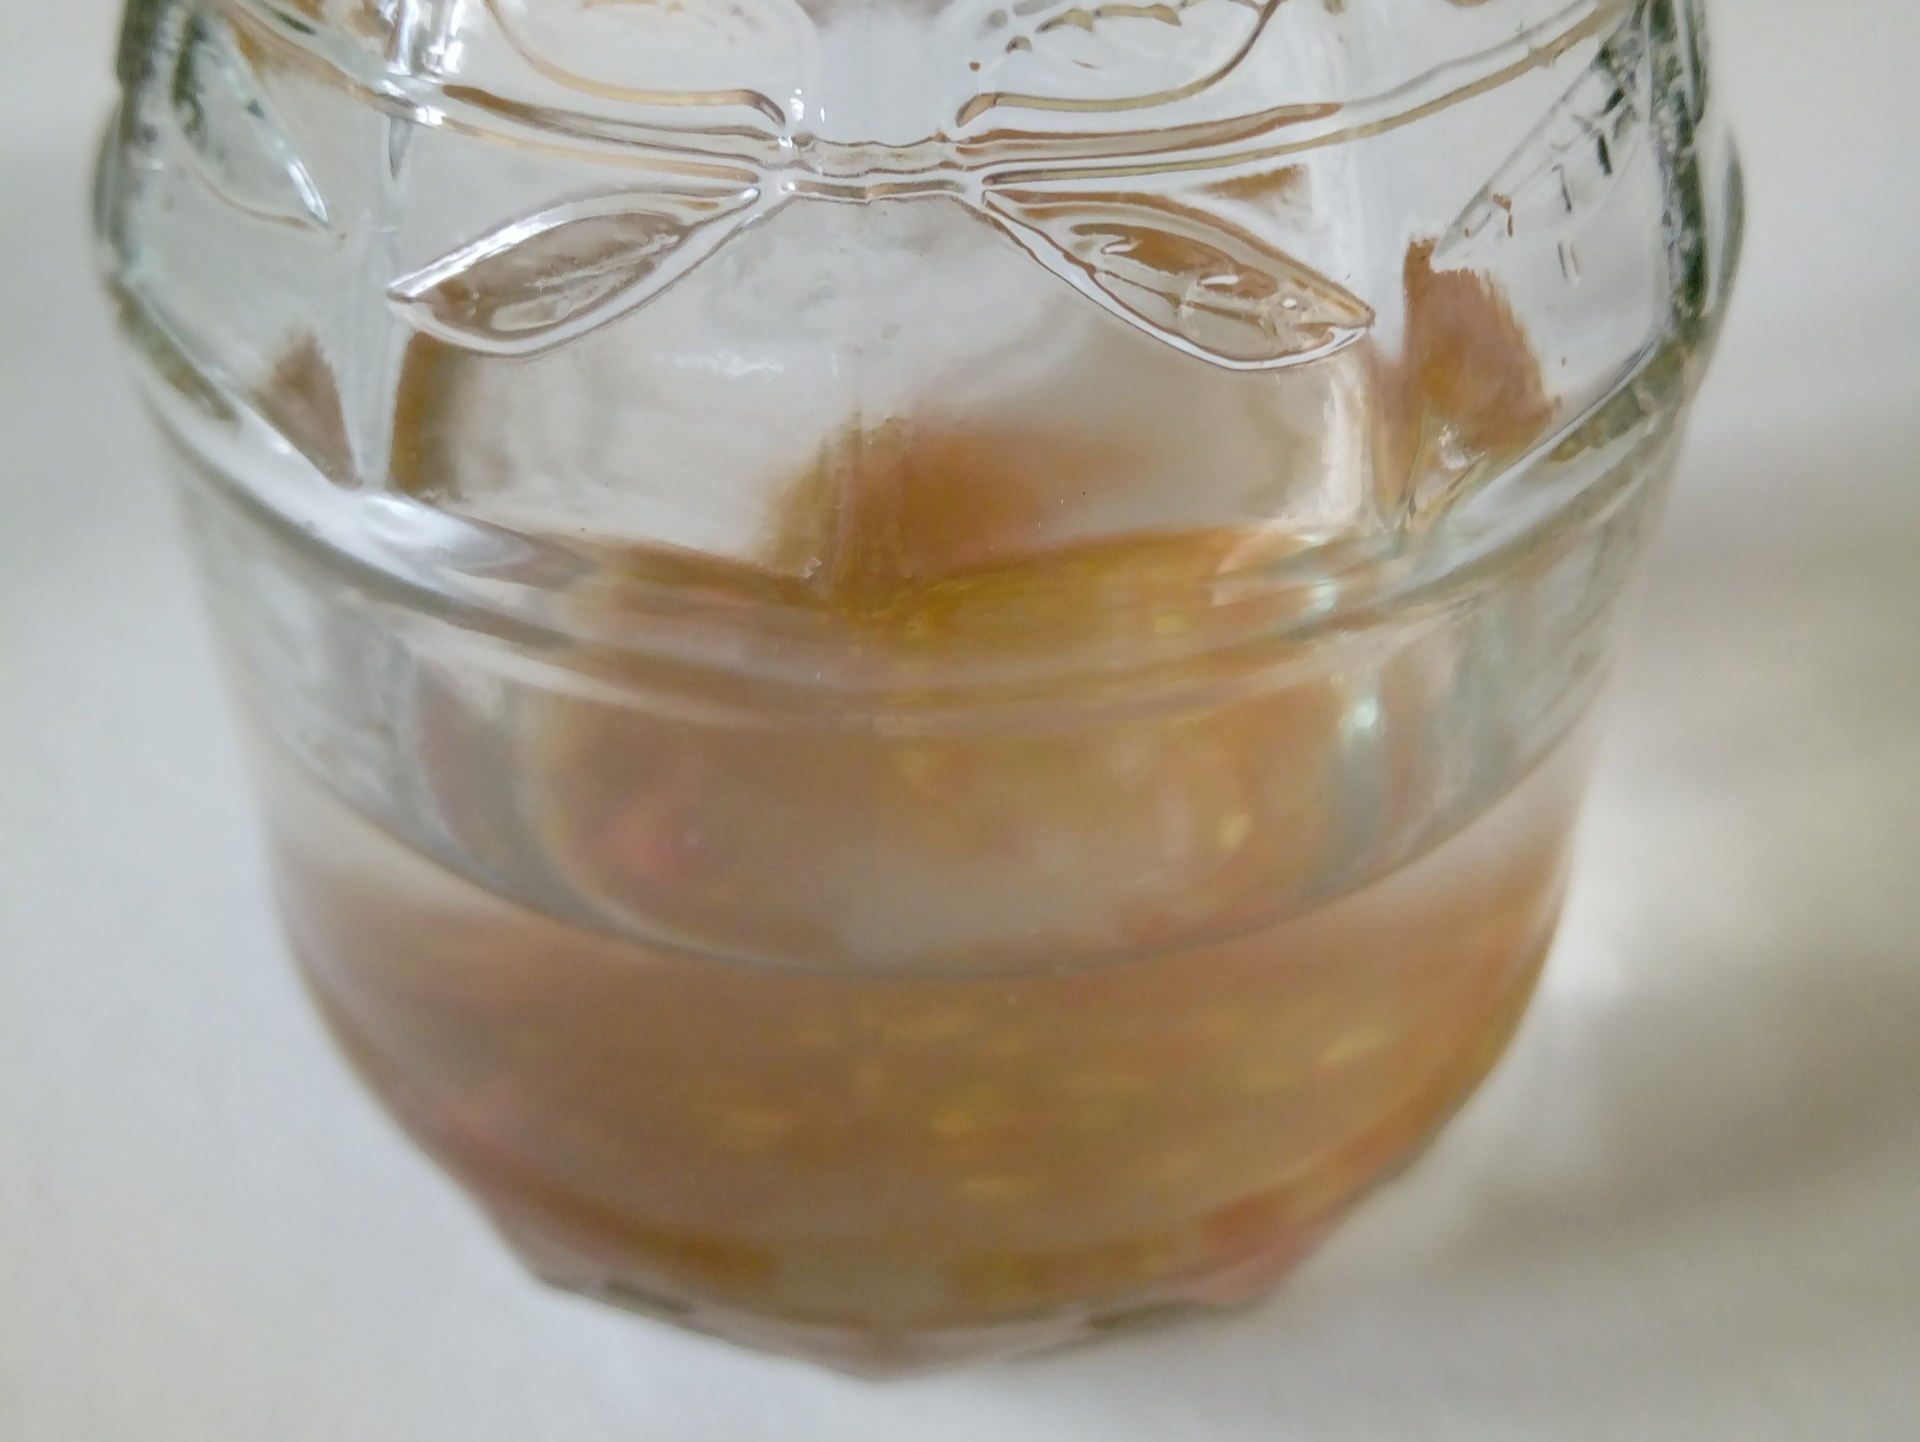 Tomato Seeds Fermenting in a Jam Jar